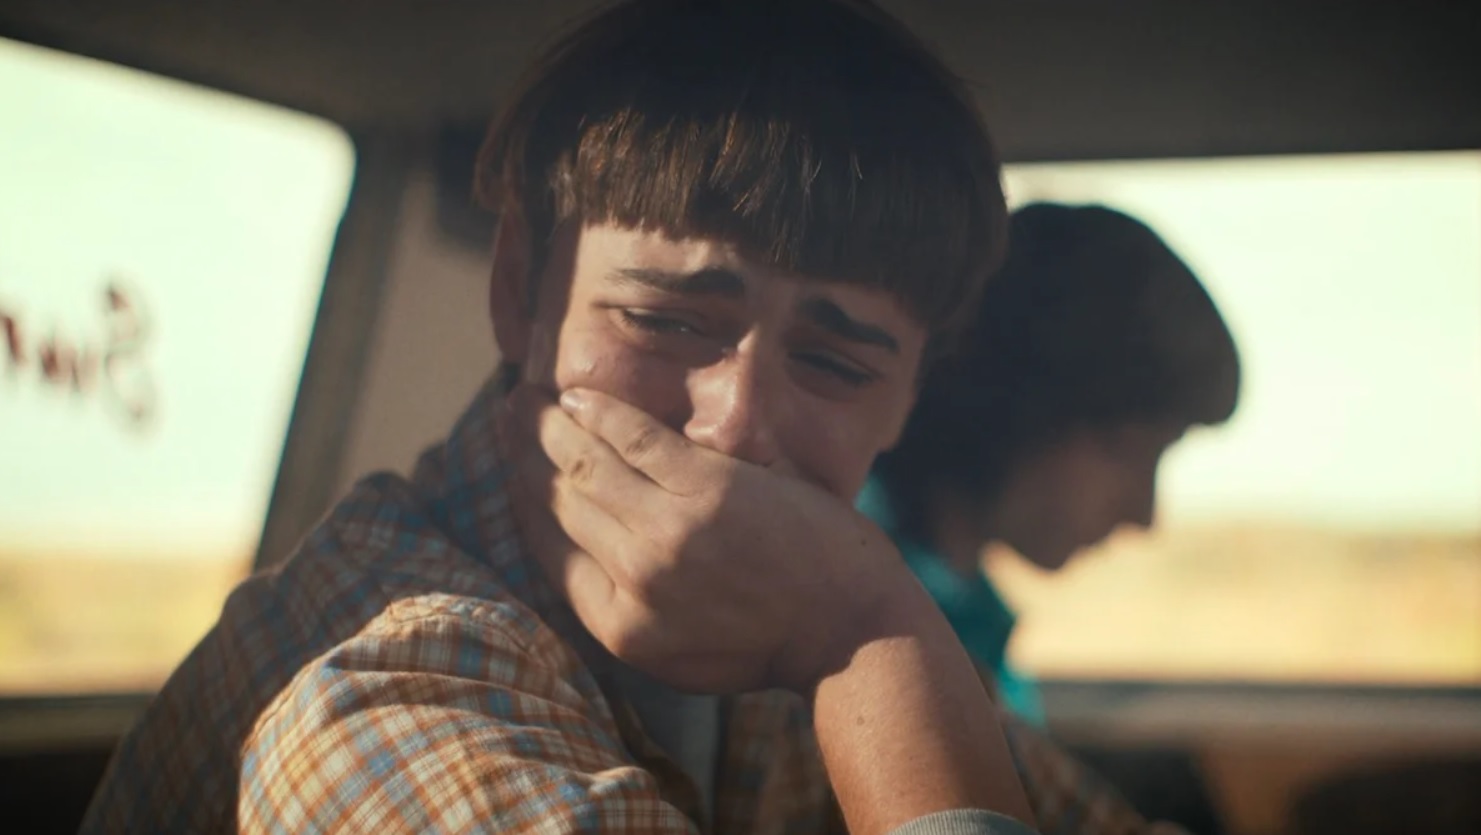 Stranger Things: Noah Schnapp confirmed that his character, Will Byers, "loves Mike"